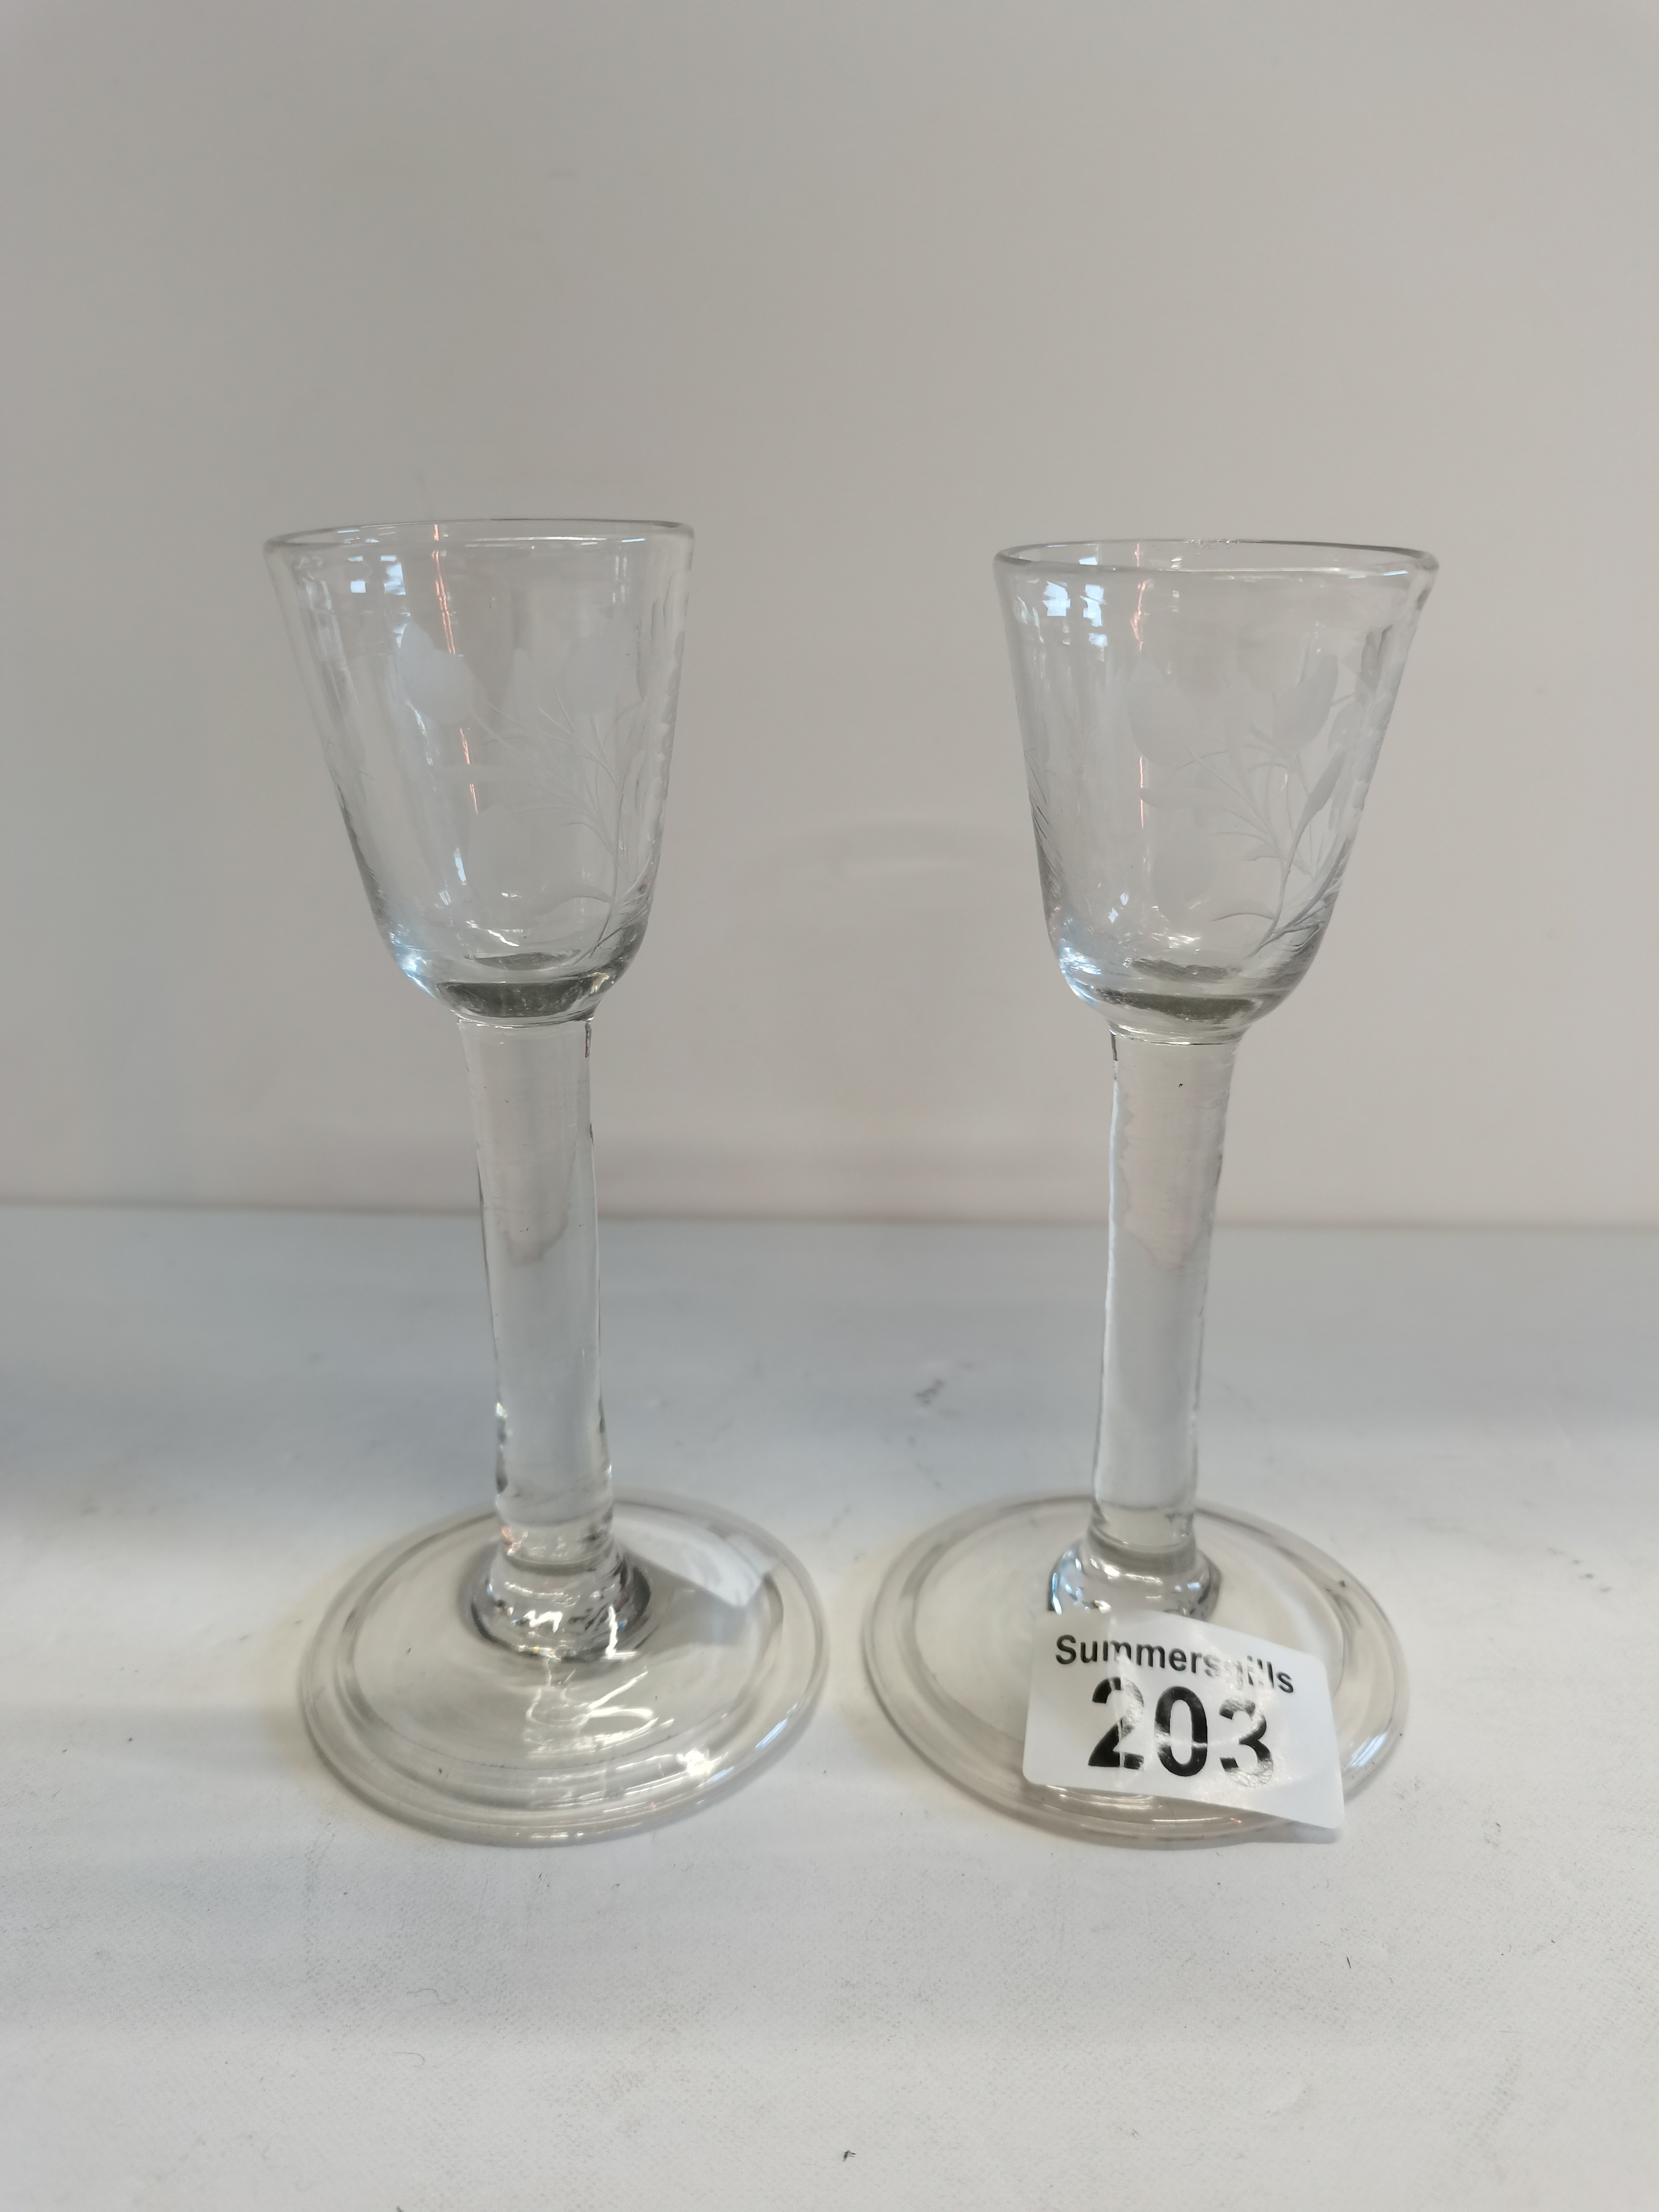 2 Antique Etched Glasses on Stems